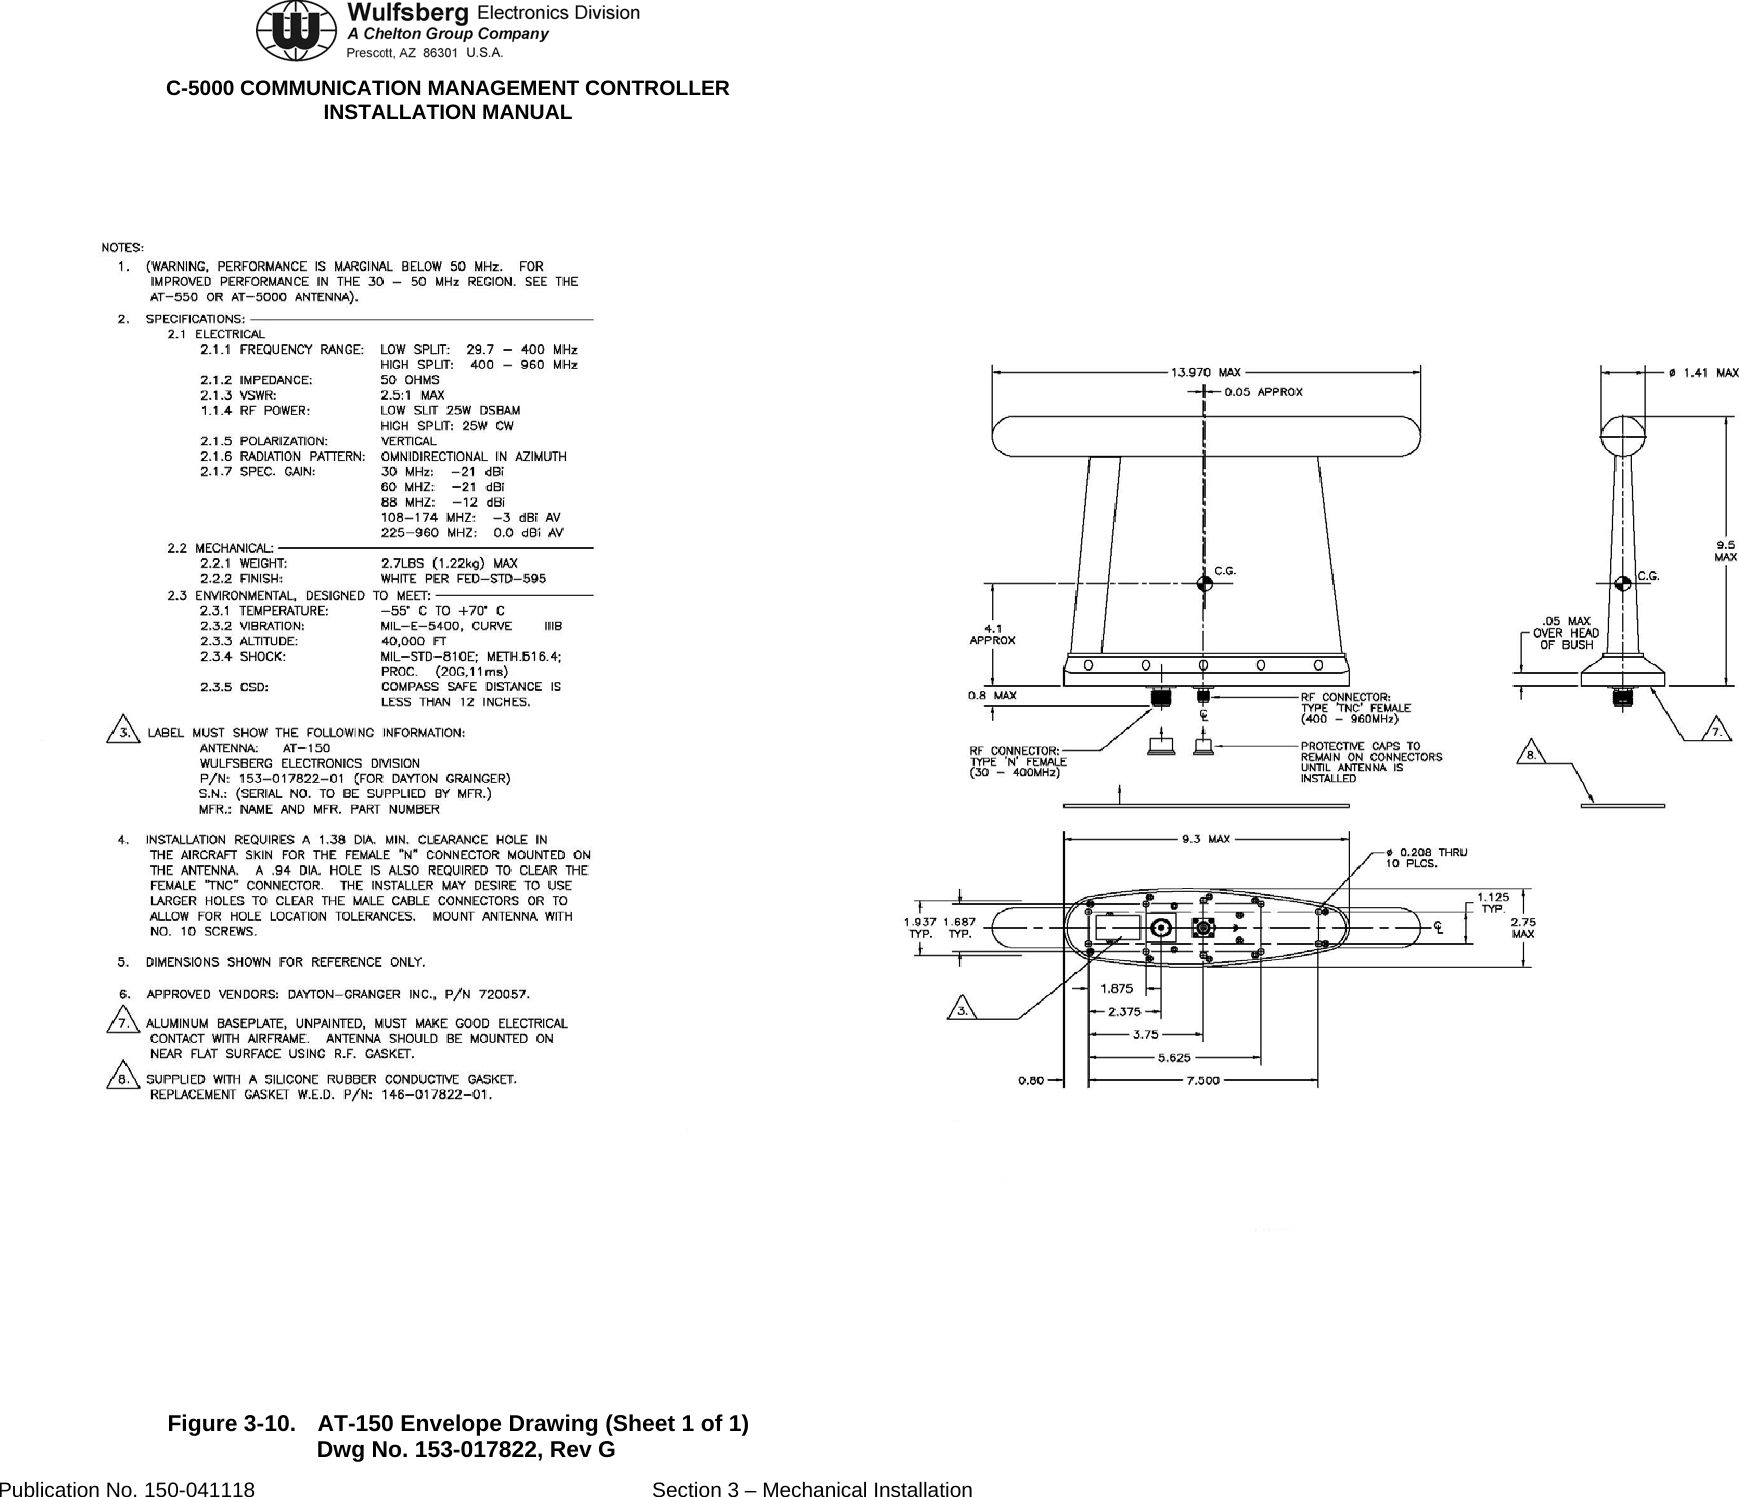  C-5000 COMMUNICATION MANAGEMENT CONTROLLER INSTALLATION MANUAL  Figure 3-10.  AT-150 Envelope Drawing (Sheet 1 of 1) Dwg No. 153-017822, Rev G Publication No. 150-041118  Section 3 – Mechanical Installation 